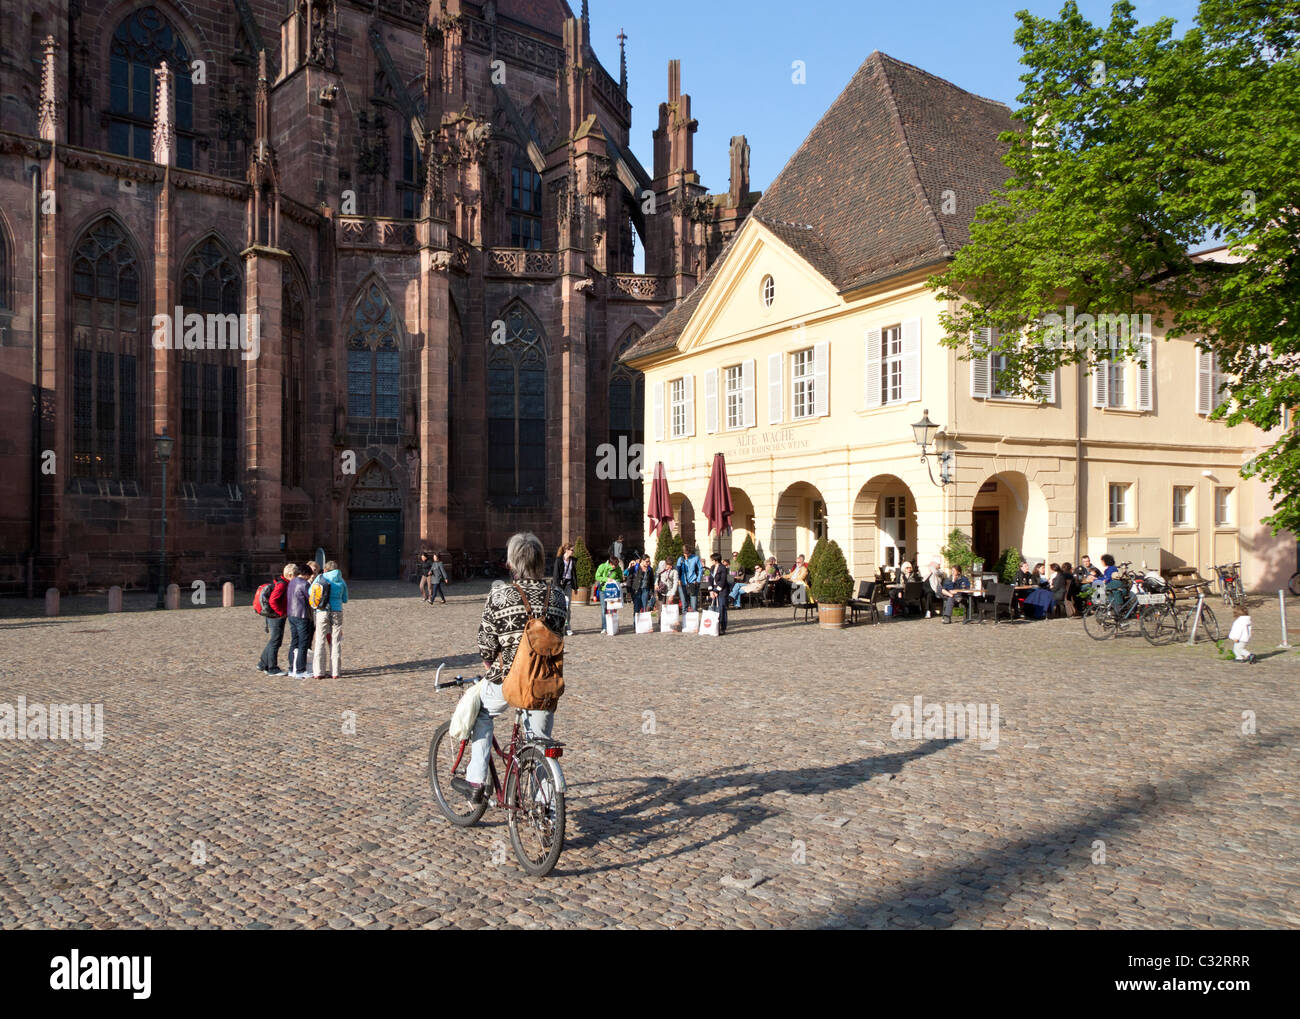 People gathering in the evening in the Münster Plattz, Cathedral Square, Freiburg, Germany Stock Photo